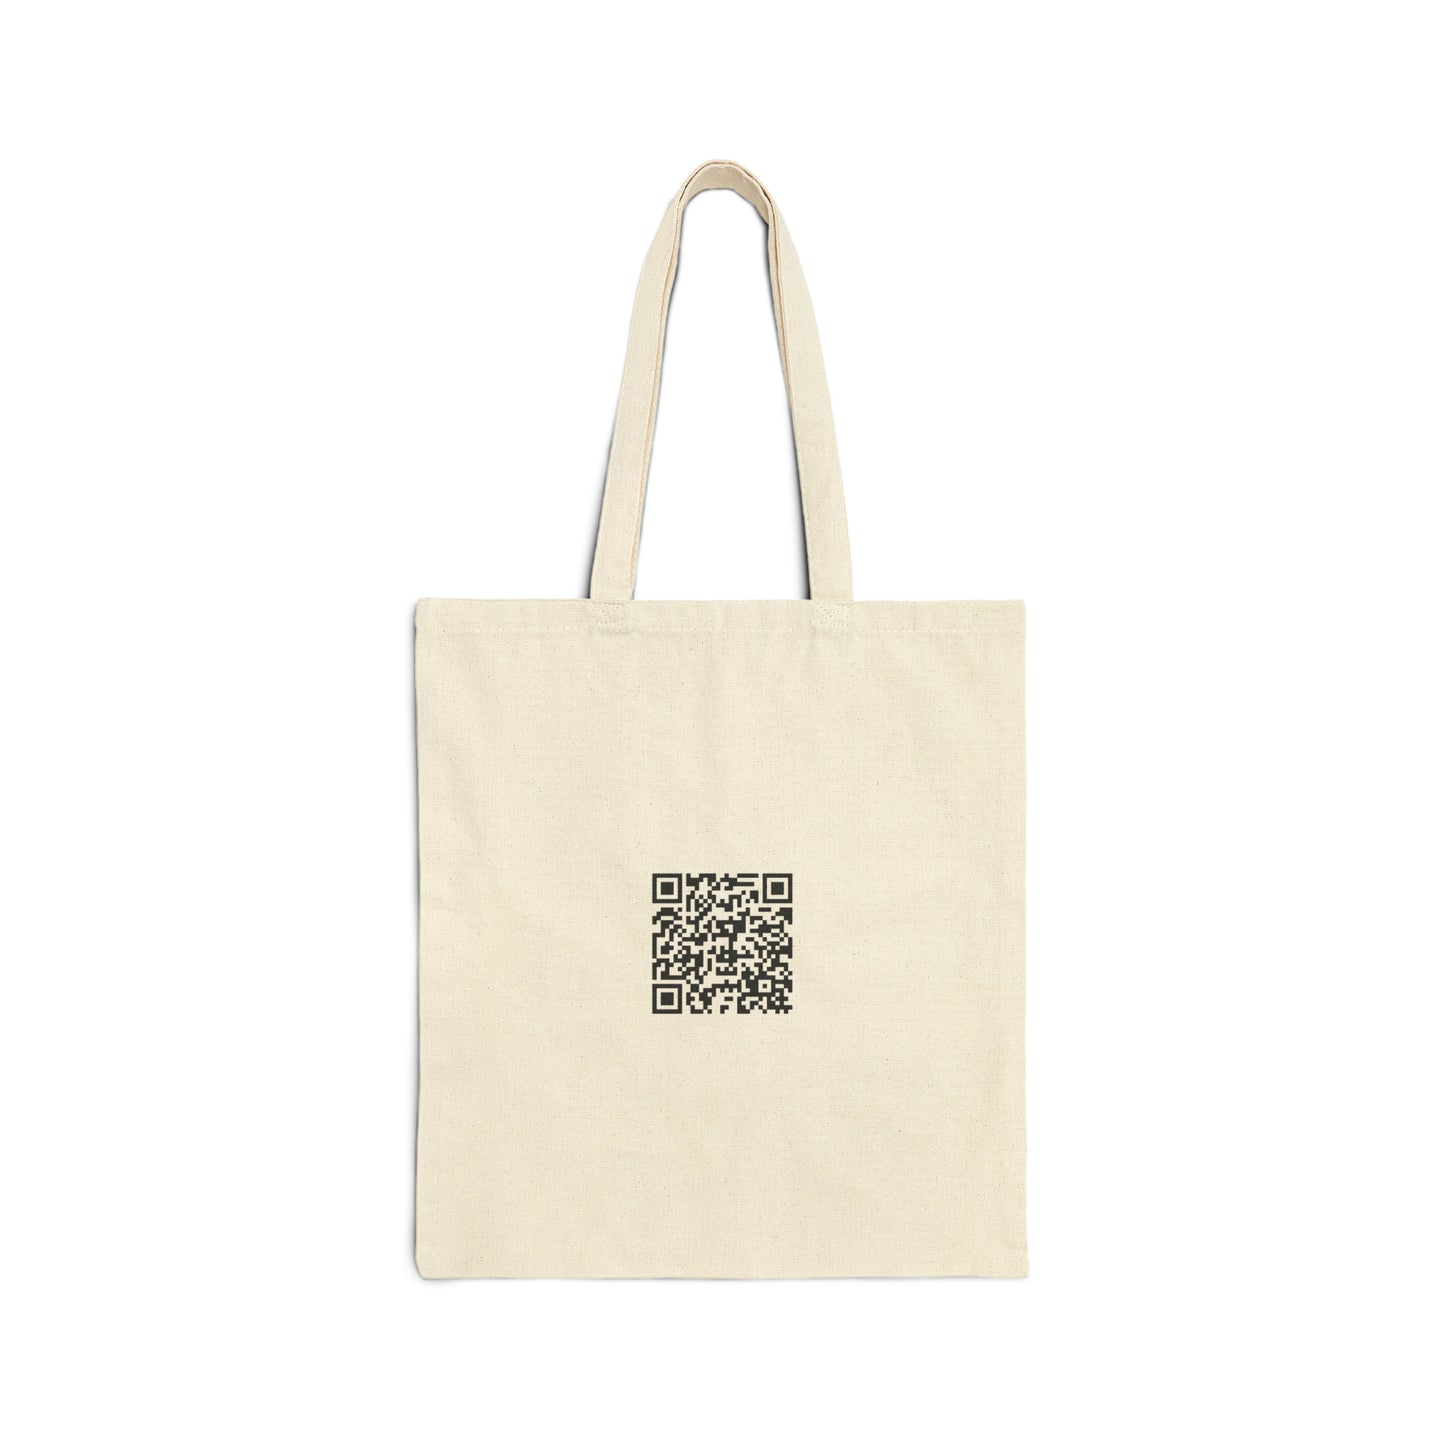 Murder in the Atchafalaya - Cotton Canvas Tote Bag